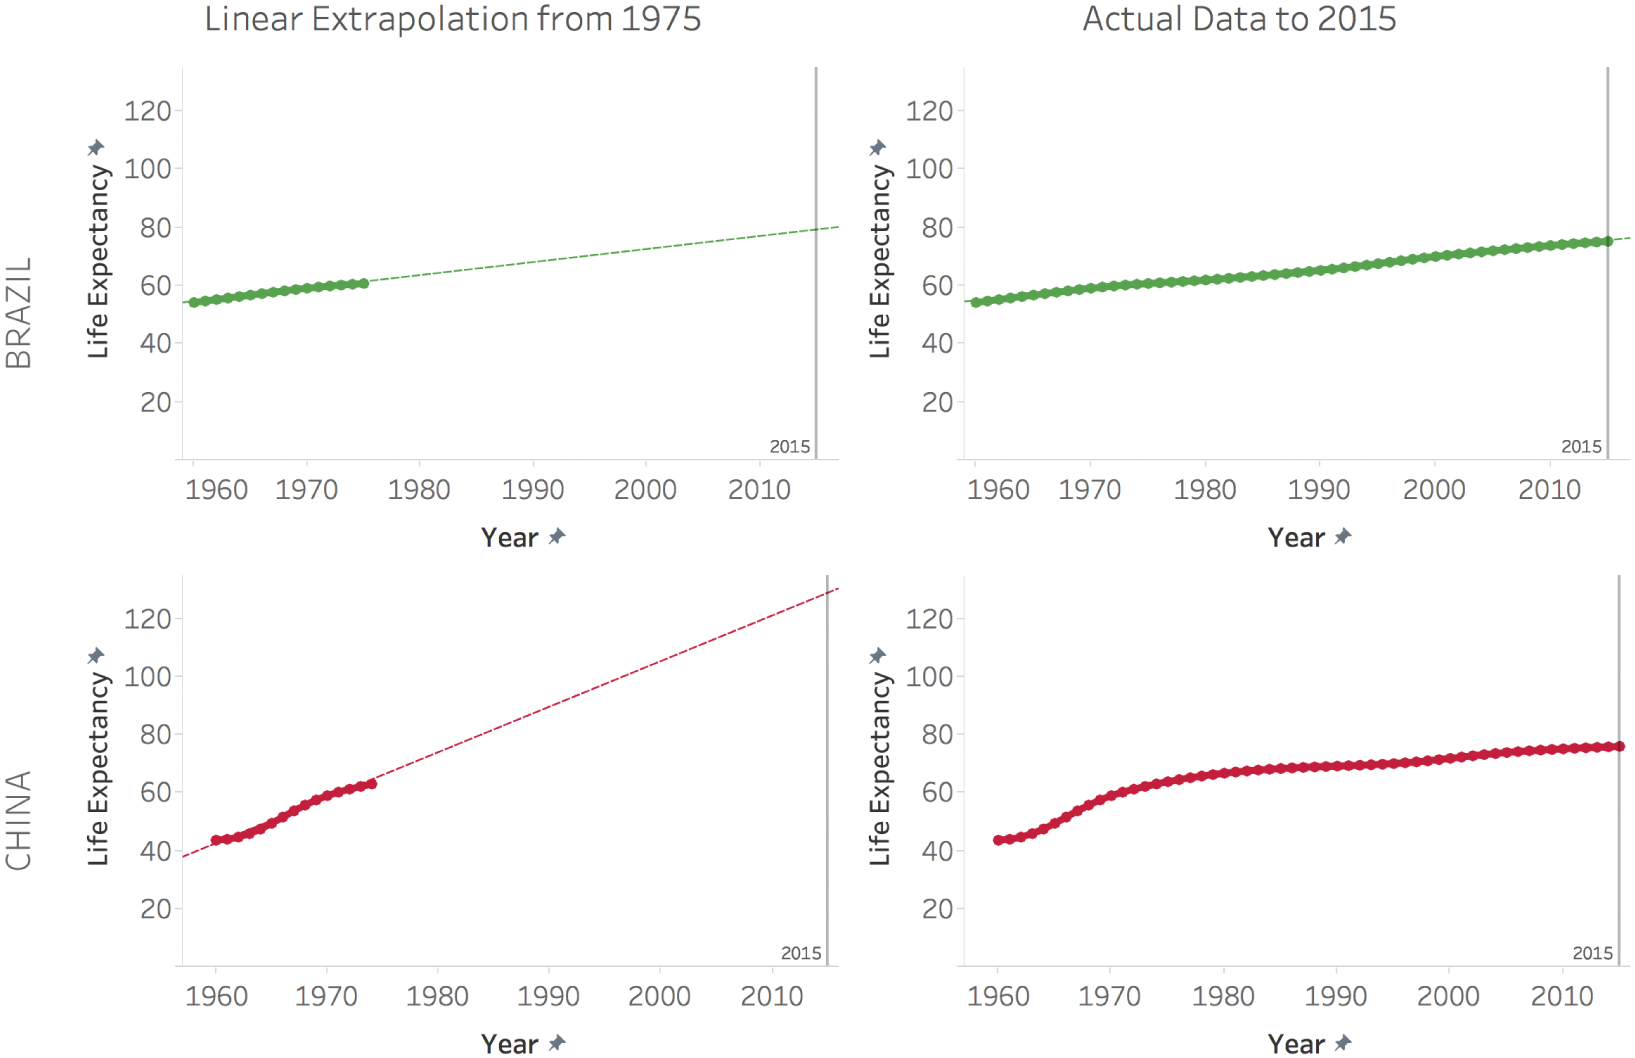 Four graphs depicting the linear extrapolation of life expectancies from 1975 (left) and the actual data to 2015 (right) for Brazil (top) and China (bottom).